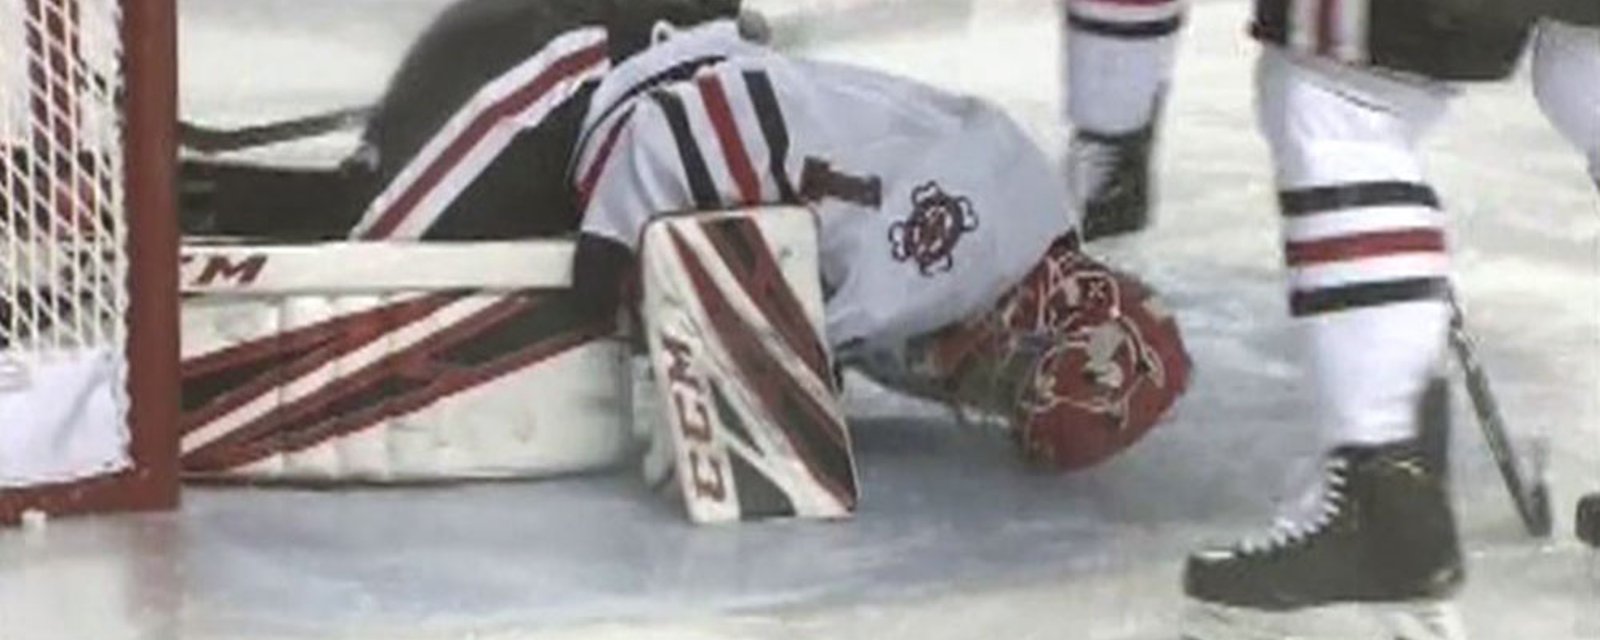 Goalie who nearly bled to death during OHL game has been released from hospital